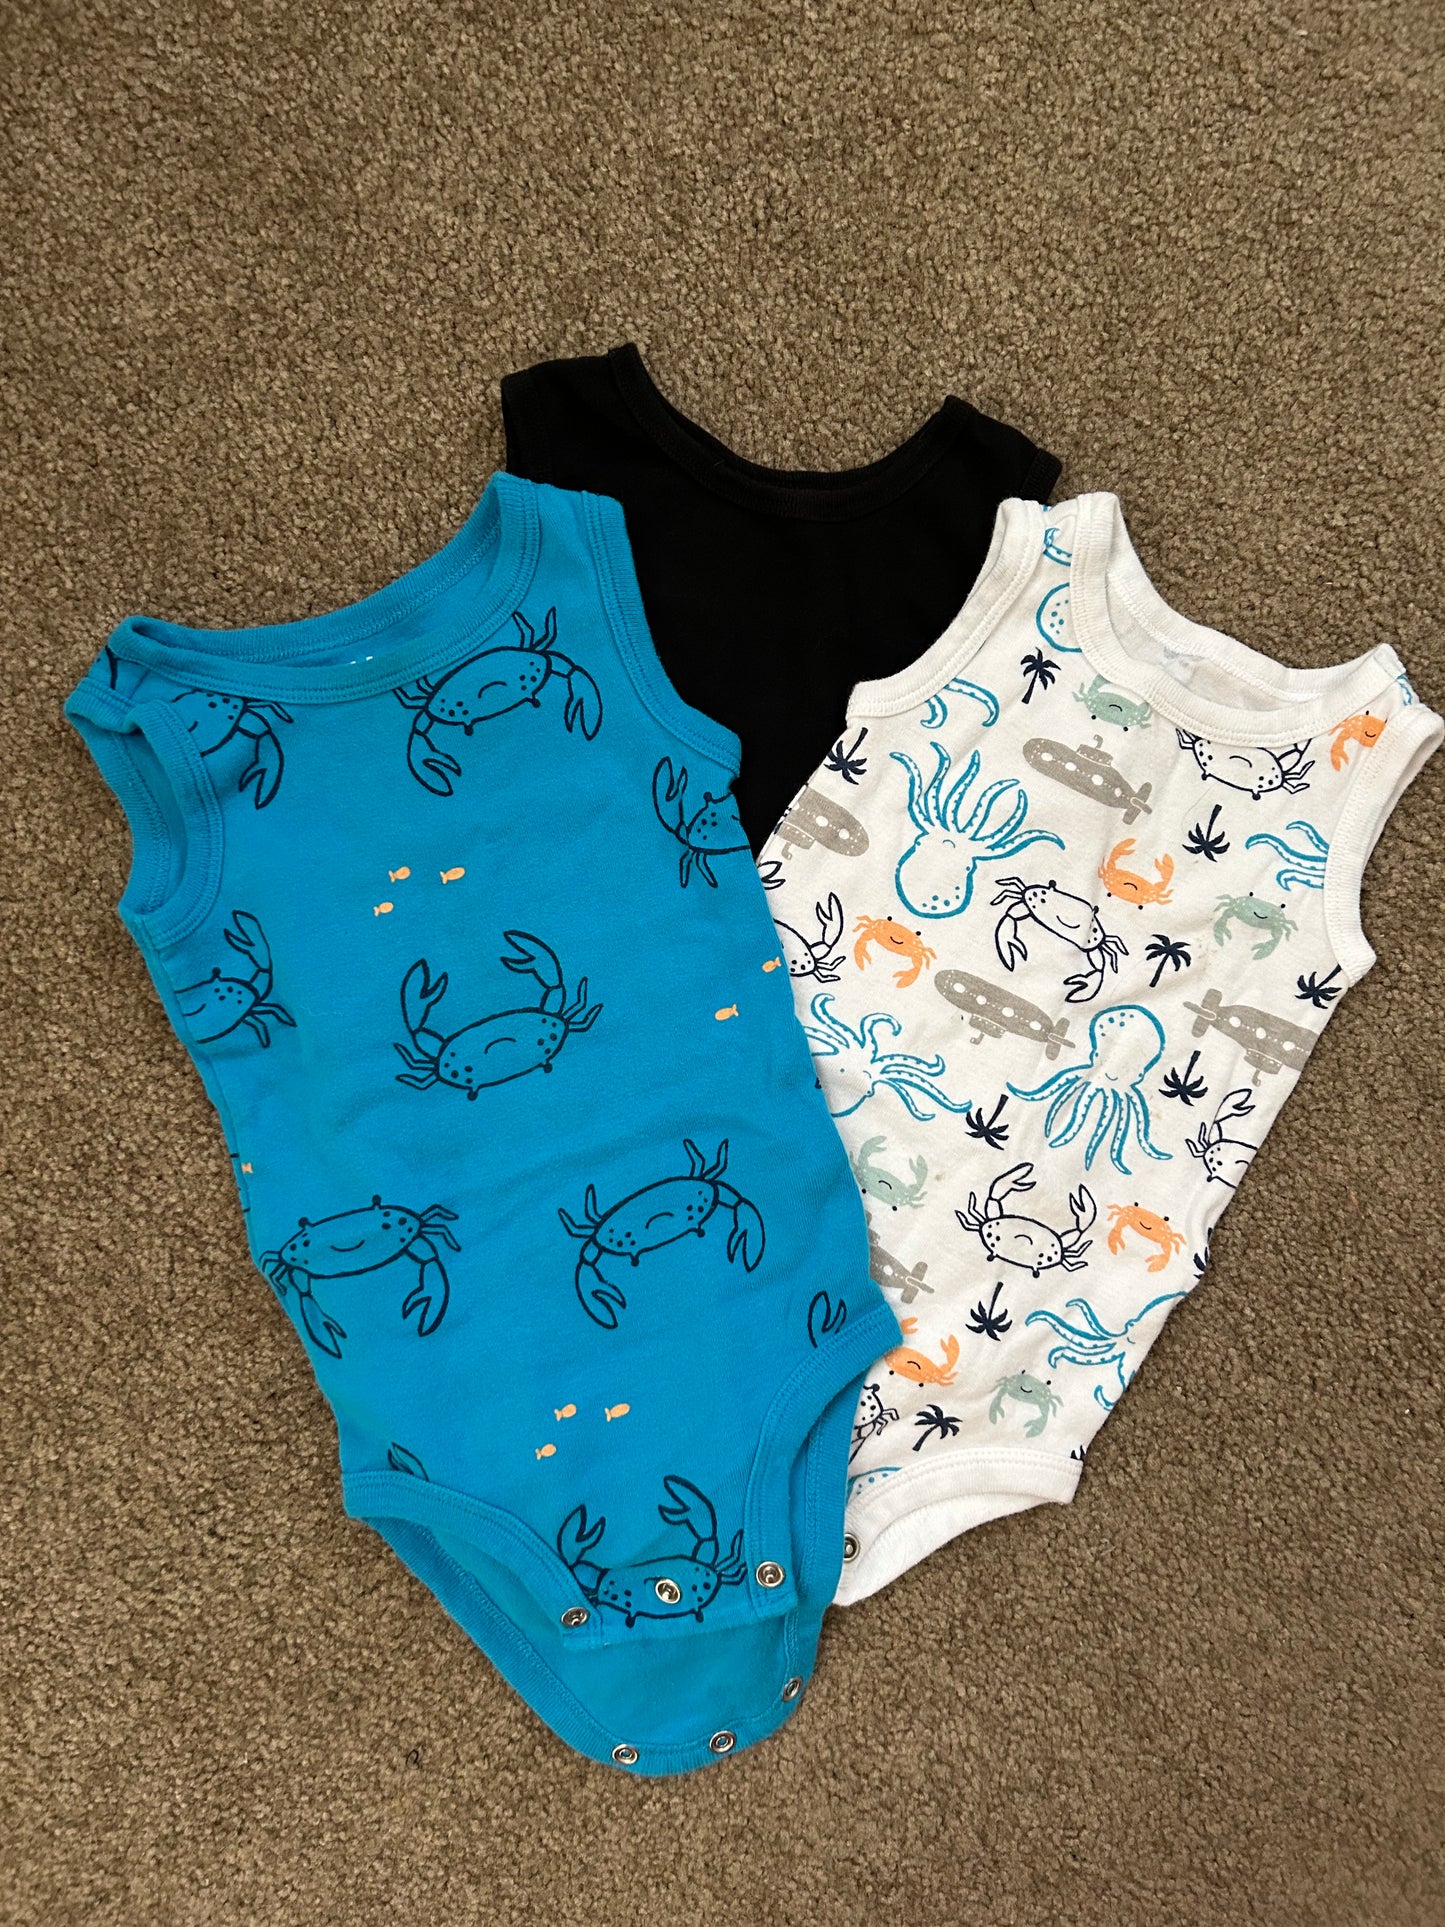 Child of Mine Boys 12 Month Tank top Bundle (3) with snaps